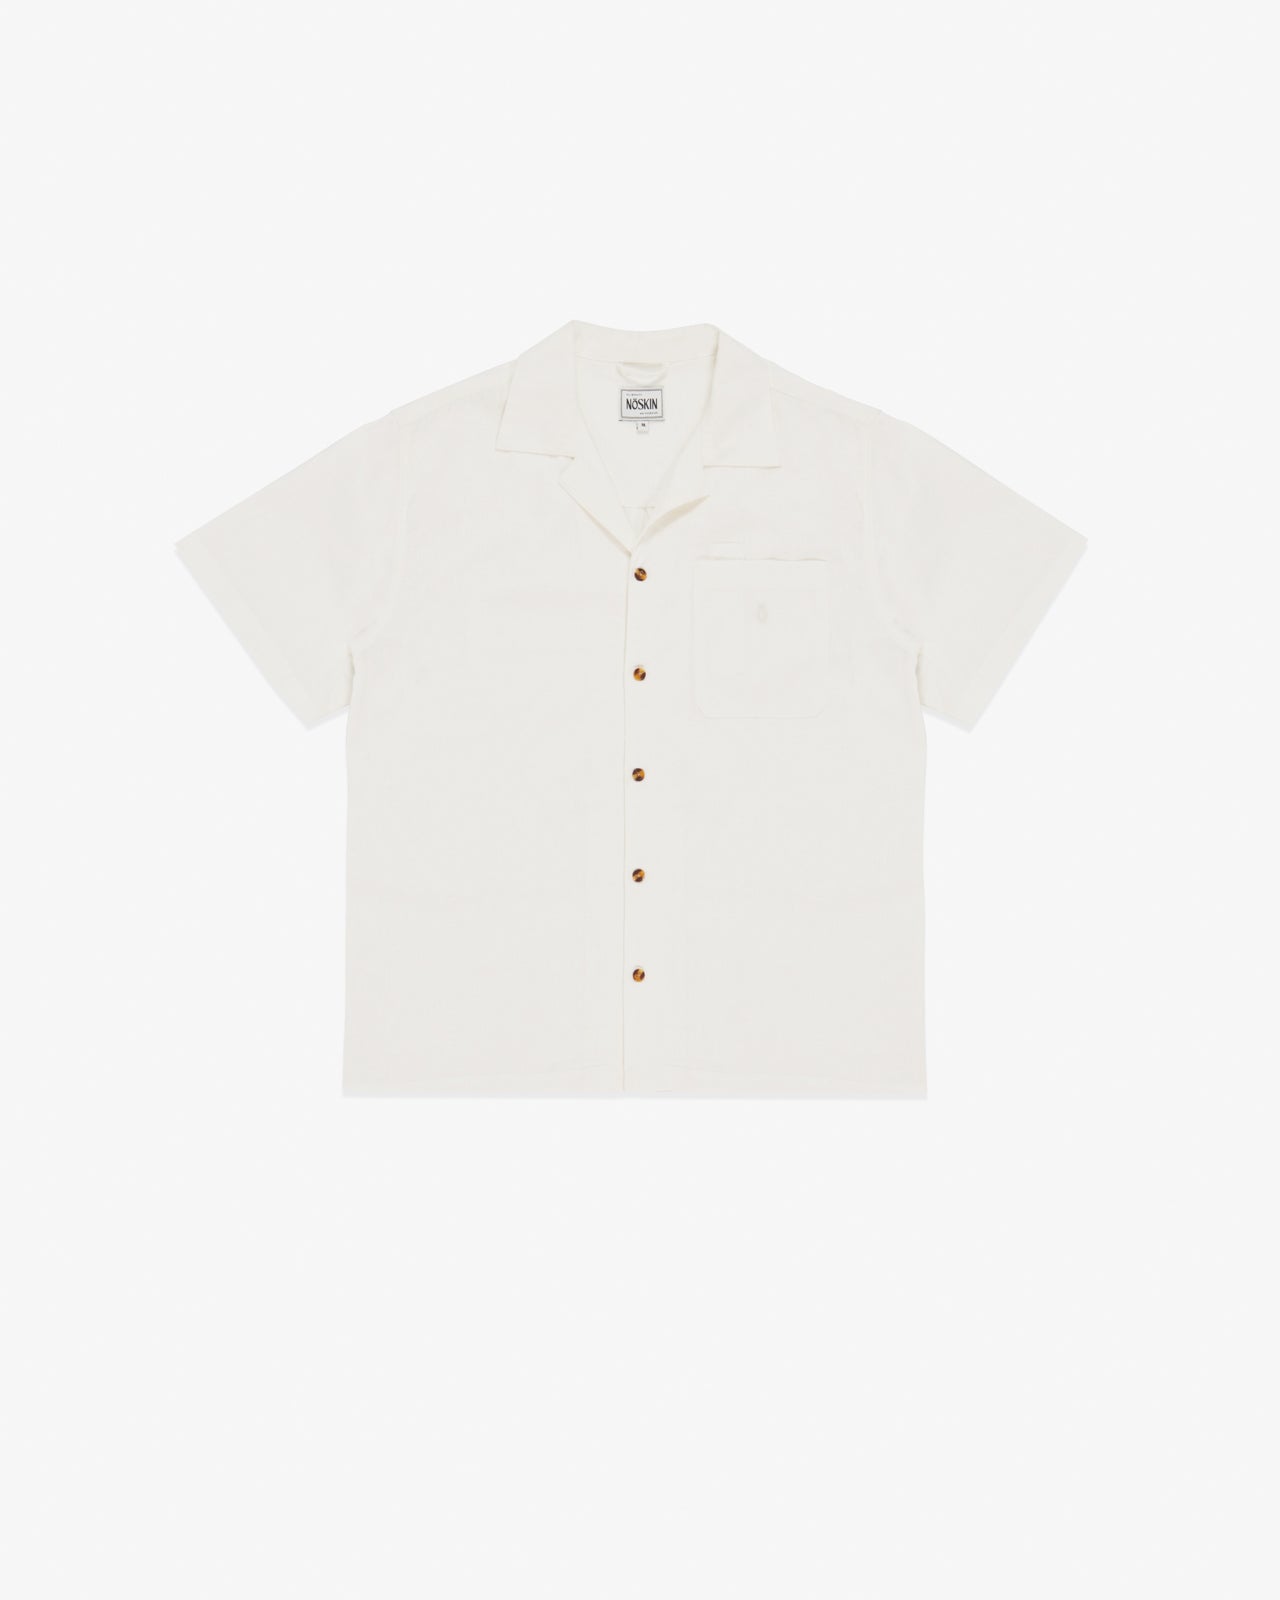 The Noskin Hemp and Organic Cotton Easey Short Sleeve Shirt in natural